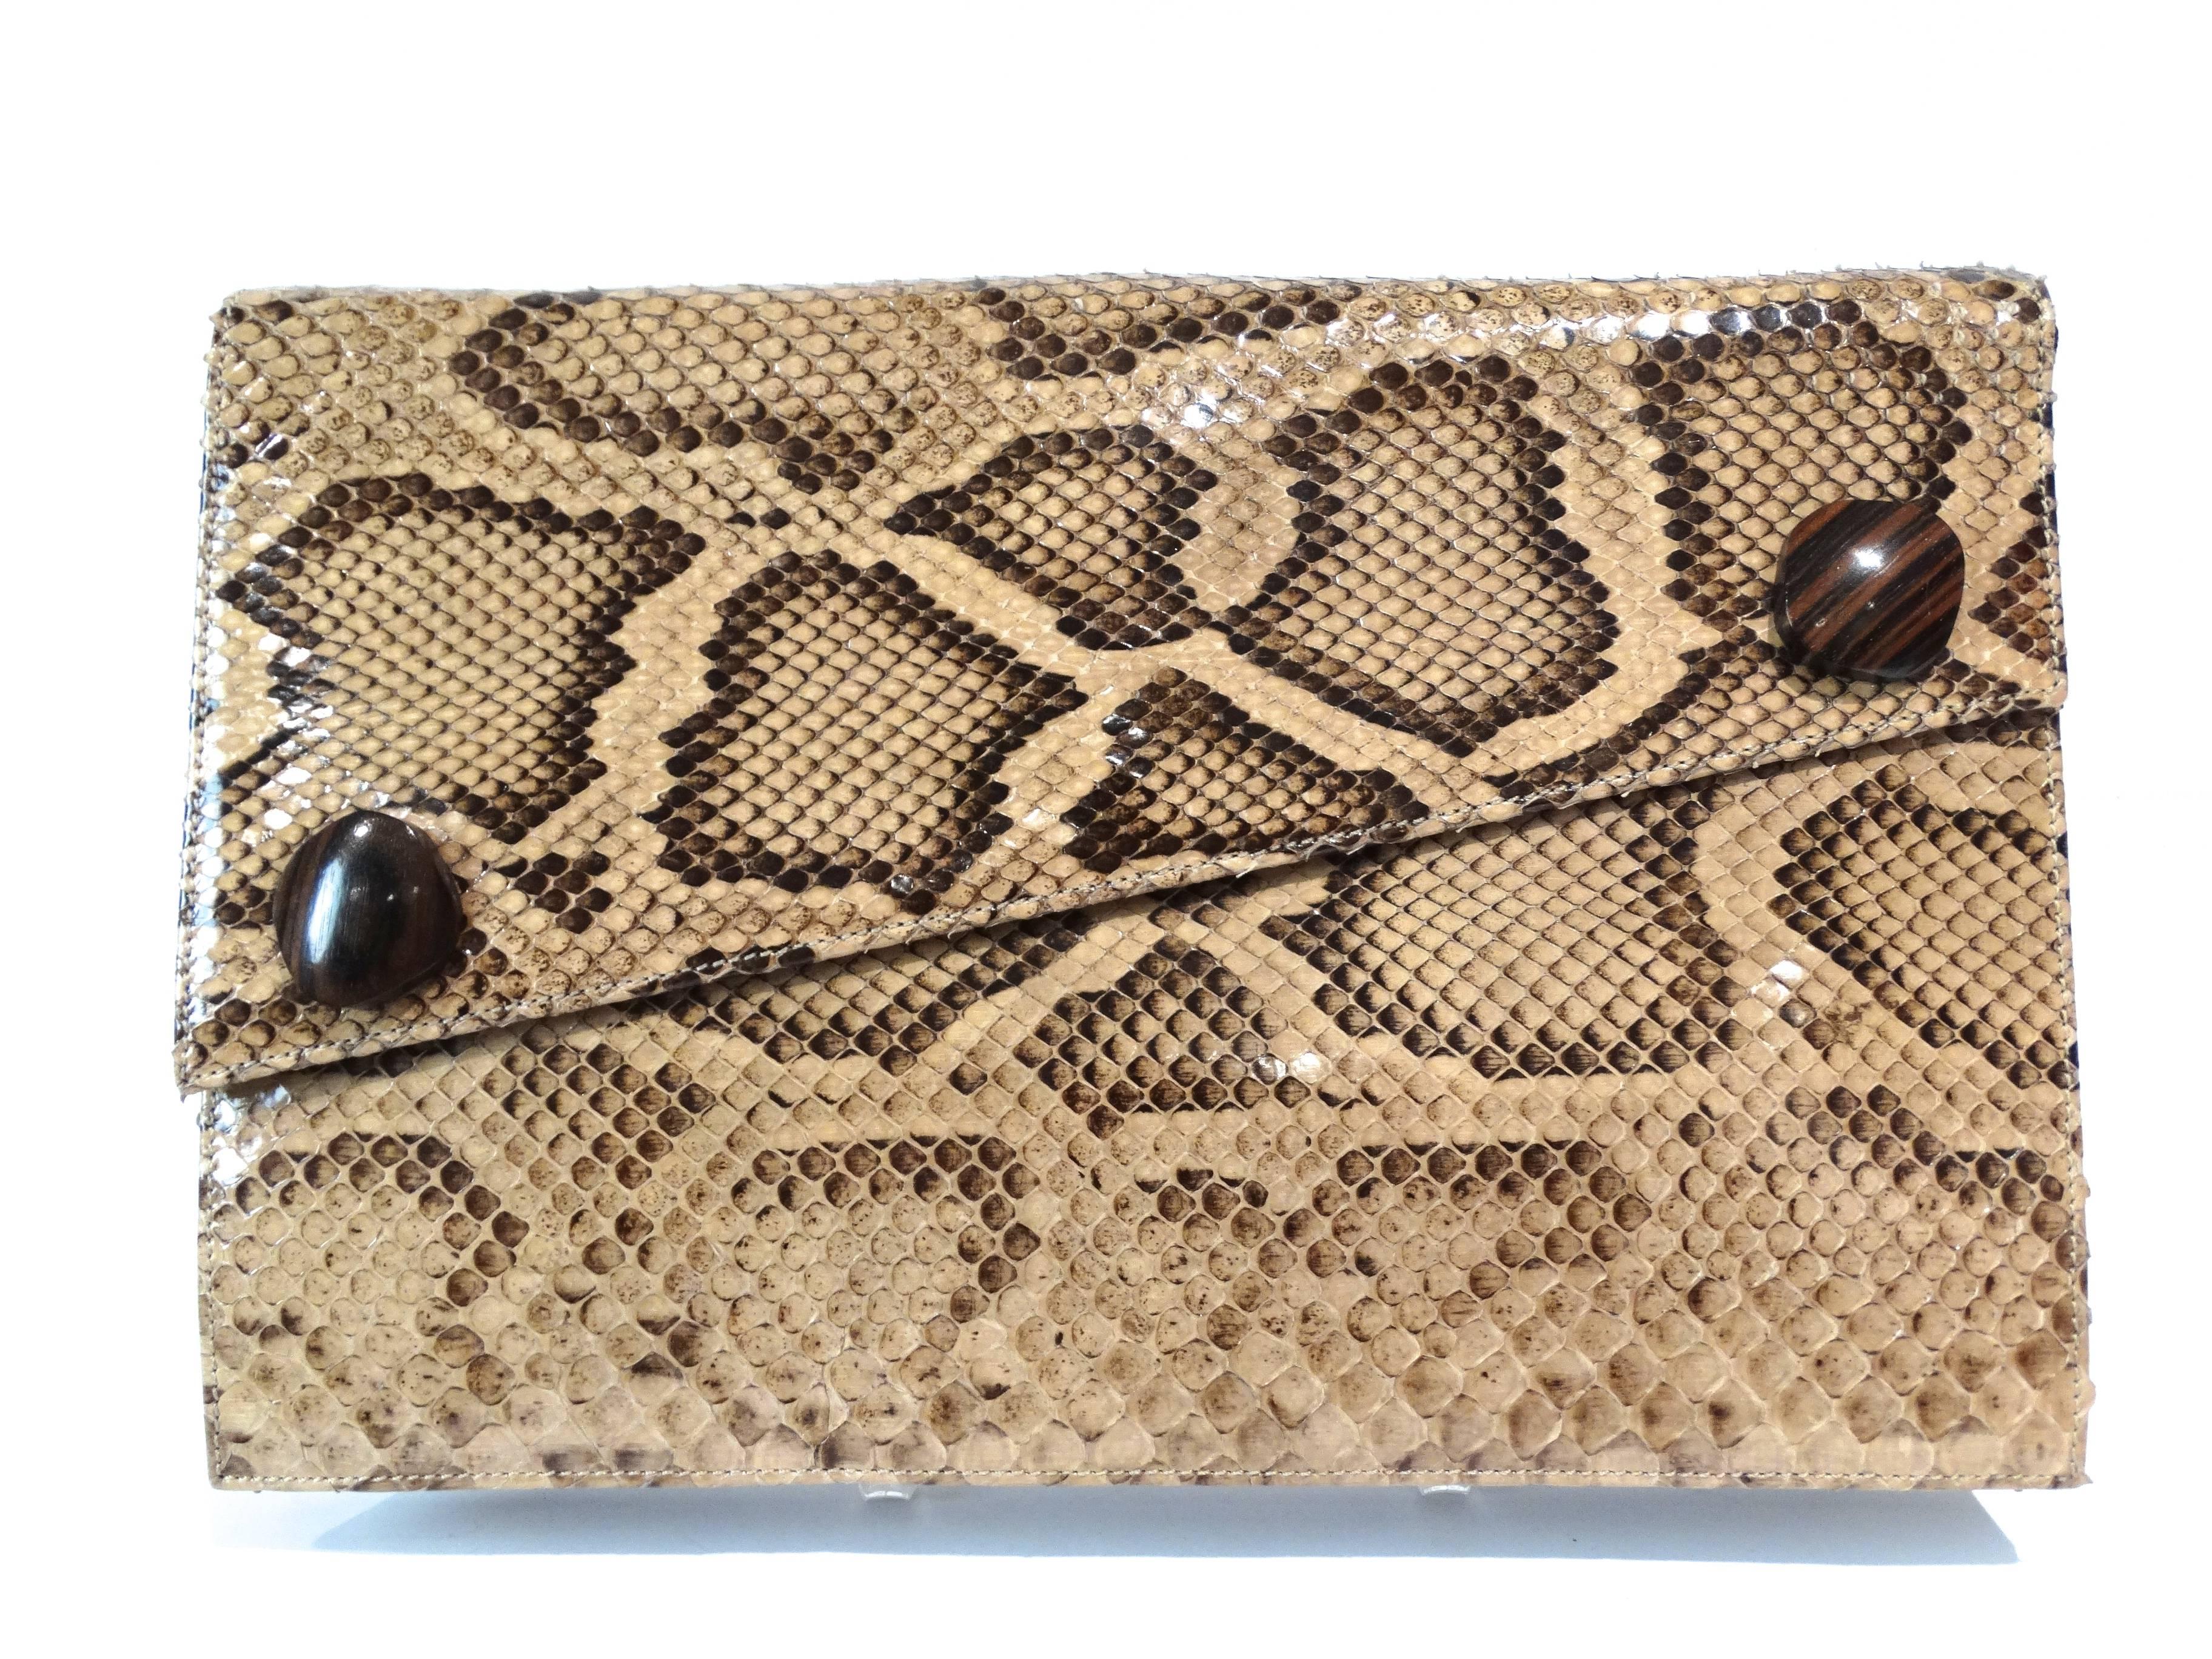 Saint Laurent Rive Gauche brown and beige python large clutch bag. It fastens at front with snap button and it is enriched by two wood sculpture pieces on the front envolpe. Clutch does have an attached woven strap on the inside. Perfect for day or